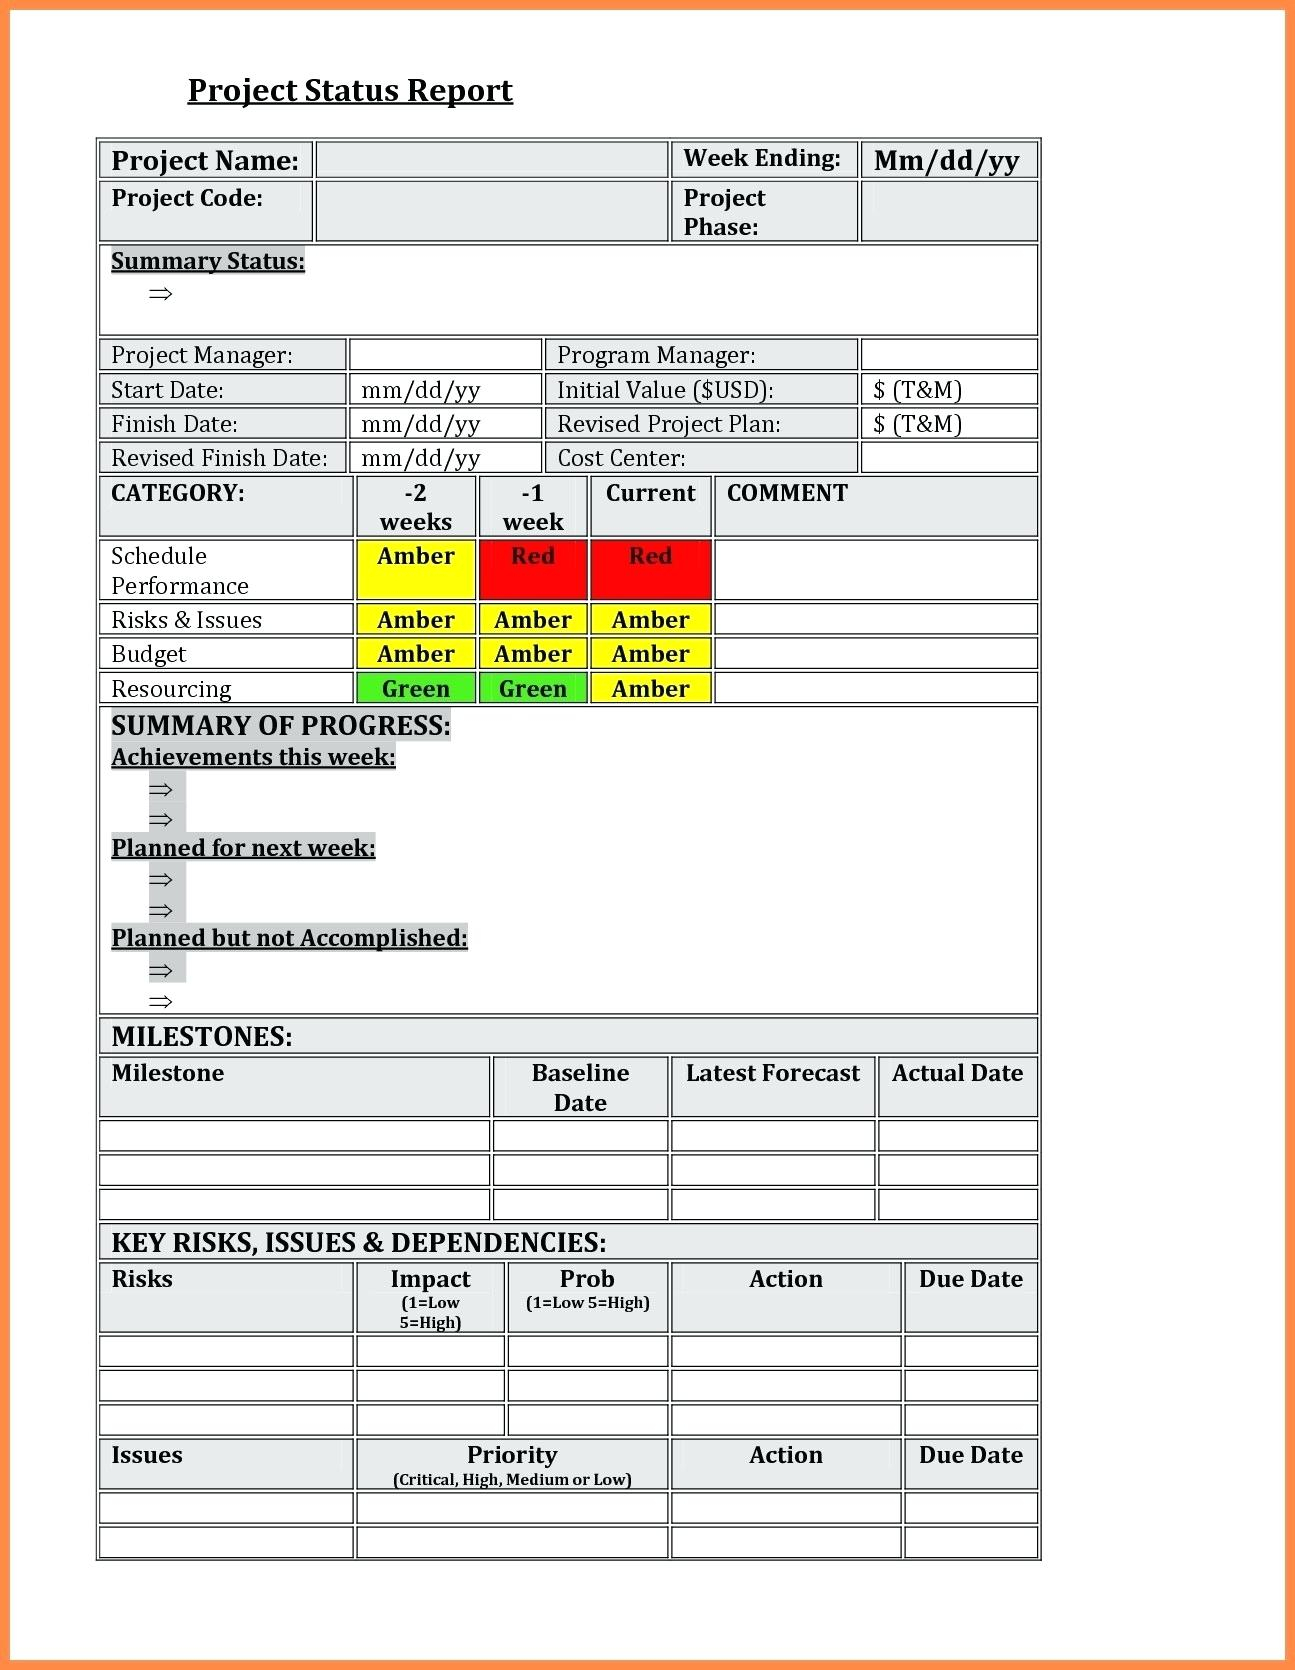 004 Status Report Template Ideas Impressive Weekly Format With Regard To Project Weekly Status Report Template Excel